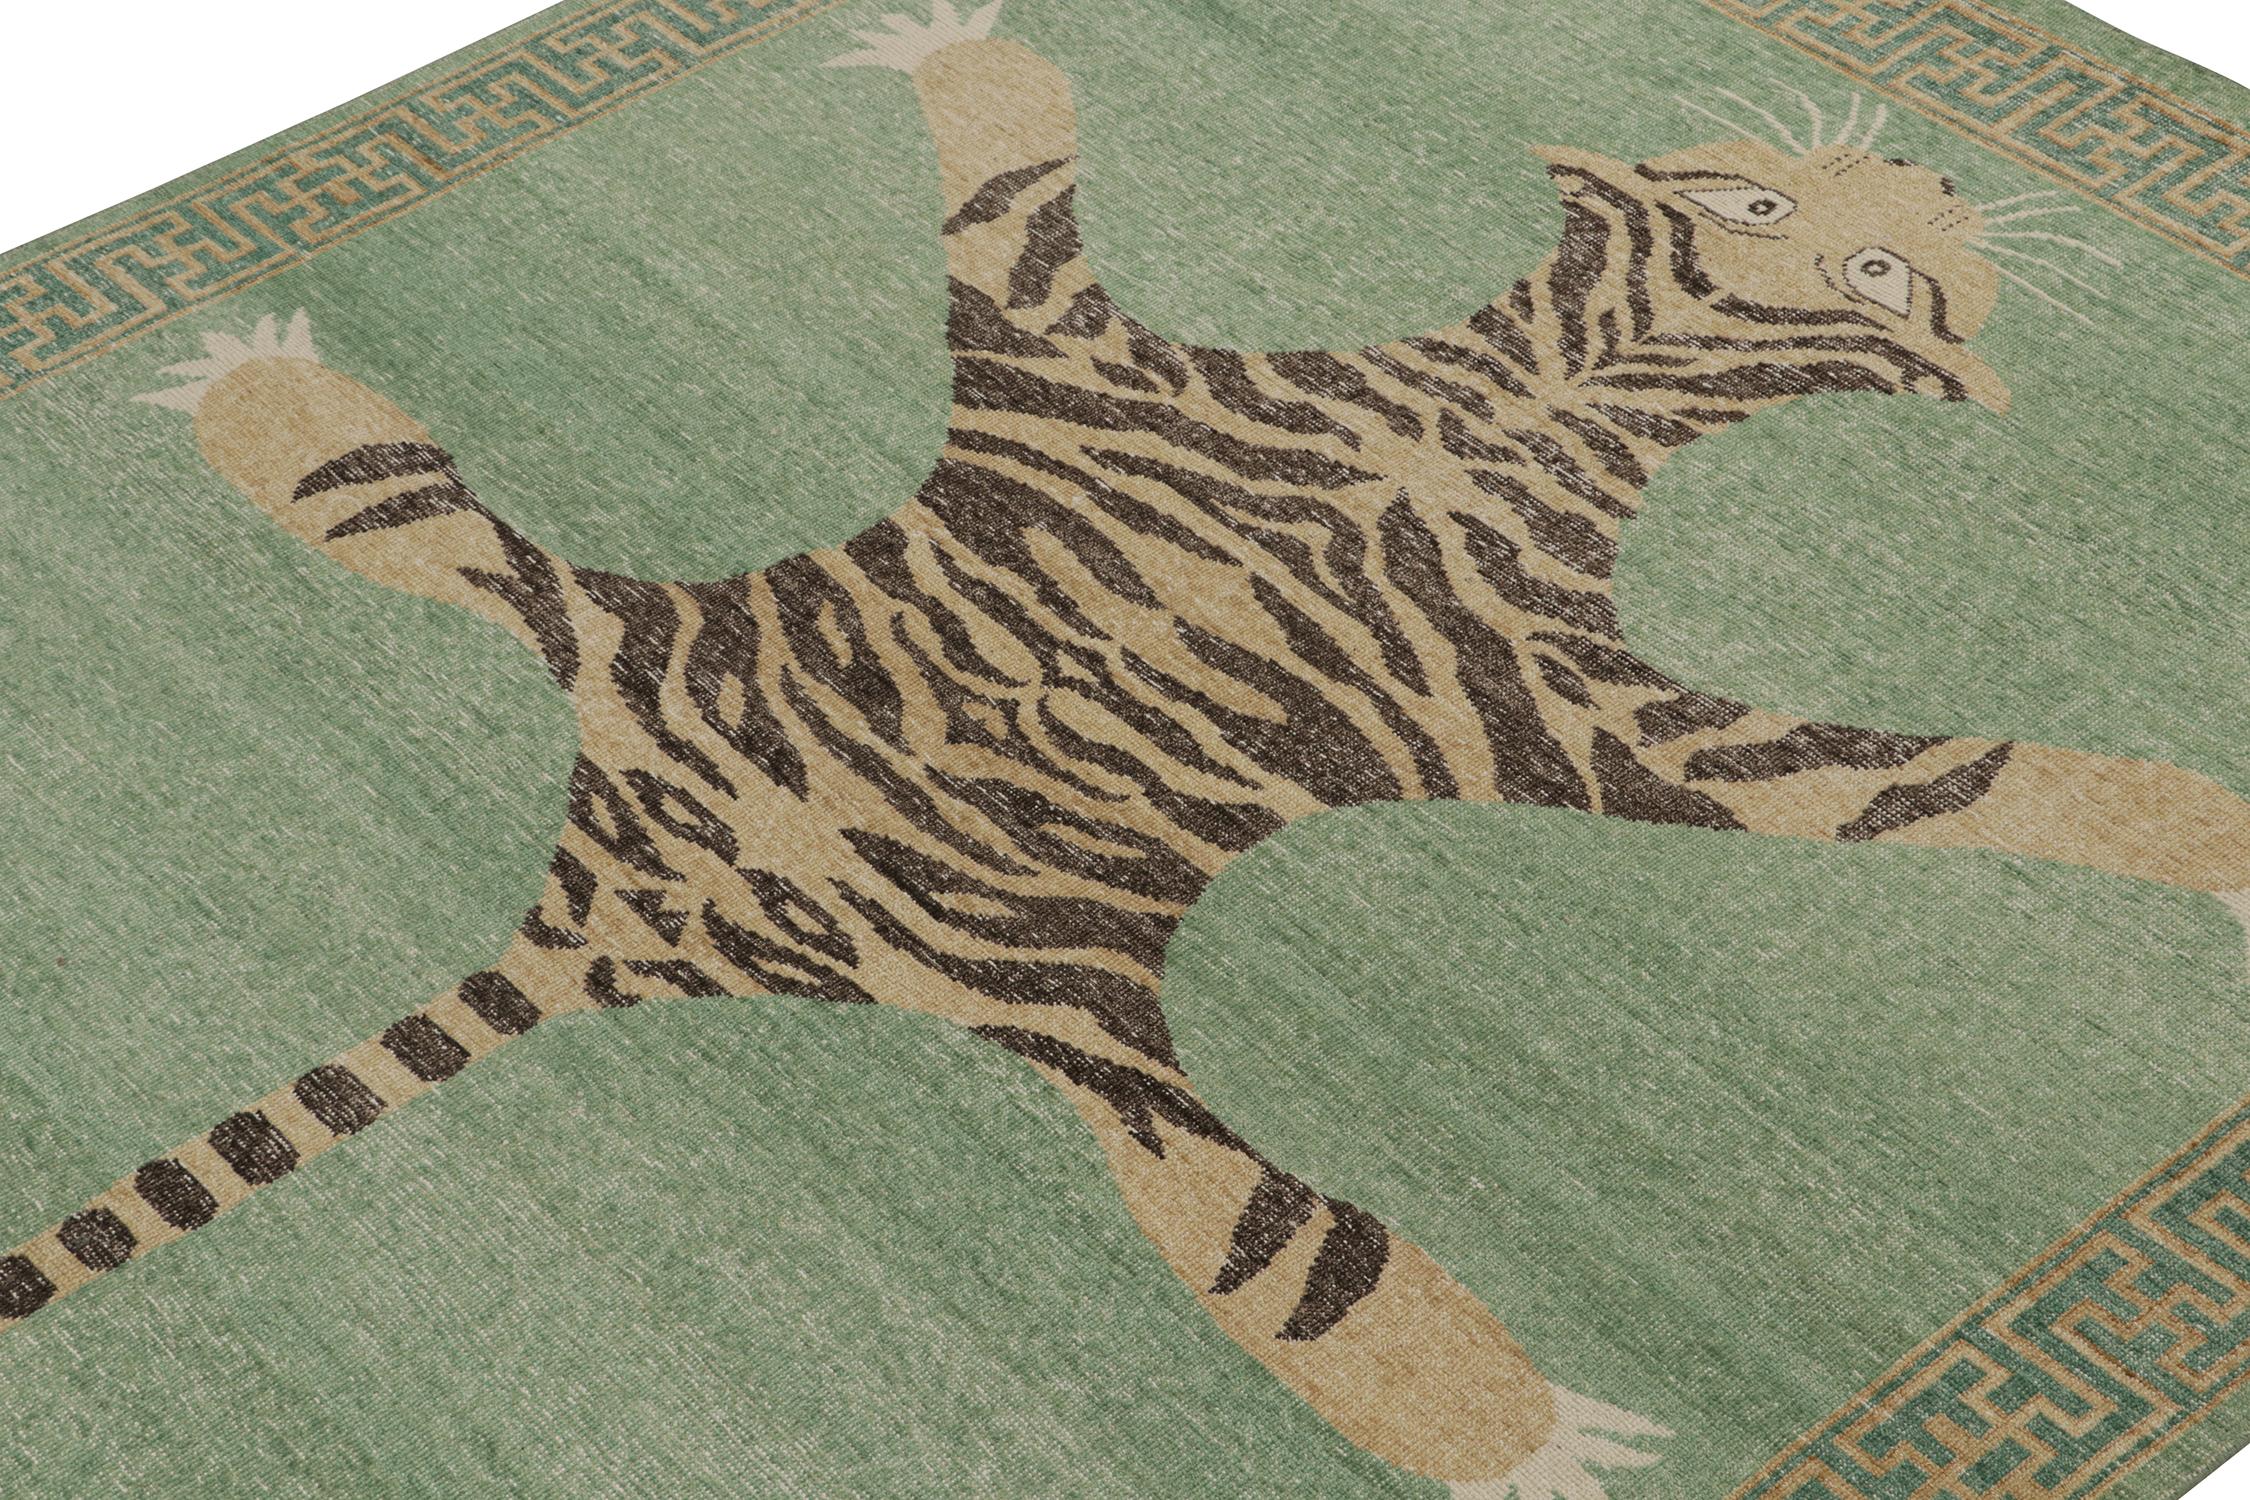 Hand-Knotted Rug & Kilim’s Distressed Style Tiger Runner in Green, Beige & Black Pictorial For Sale